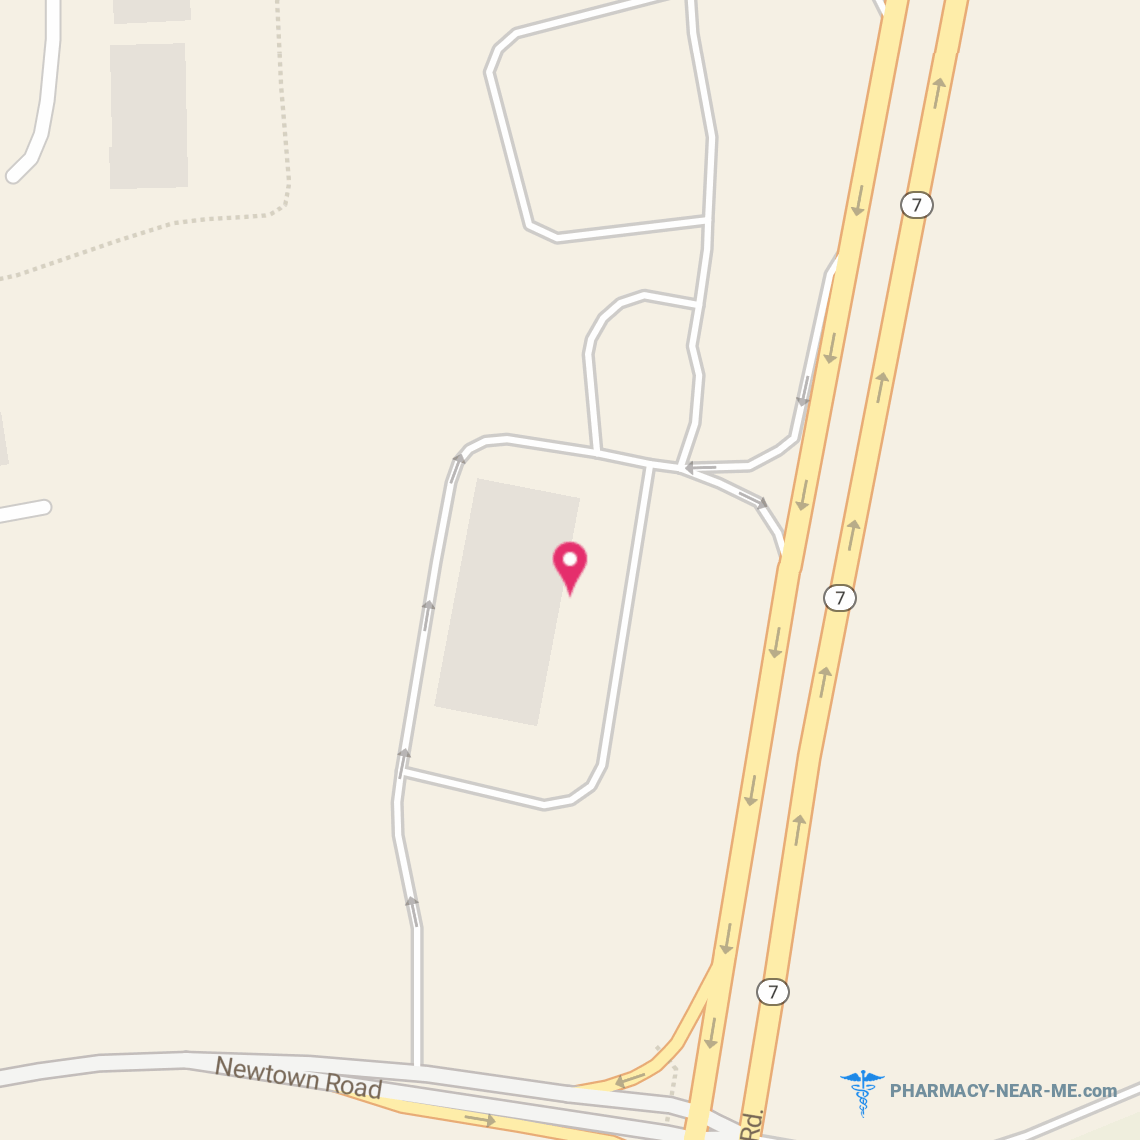 CPH CORP - Pharmacy Hours, Phone, Reviews & Information: 484 Bear Christiana Rd, Bear, Delaware 19701, United States